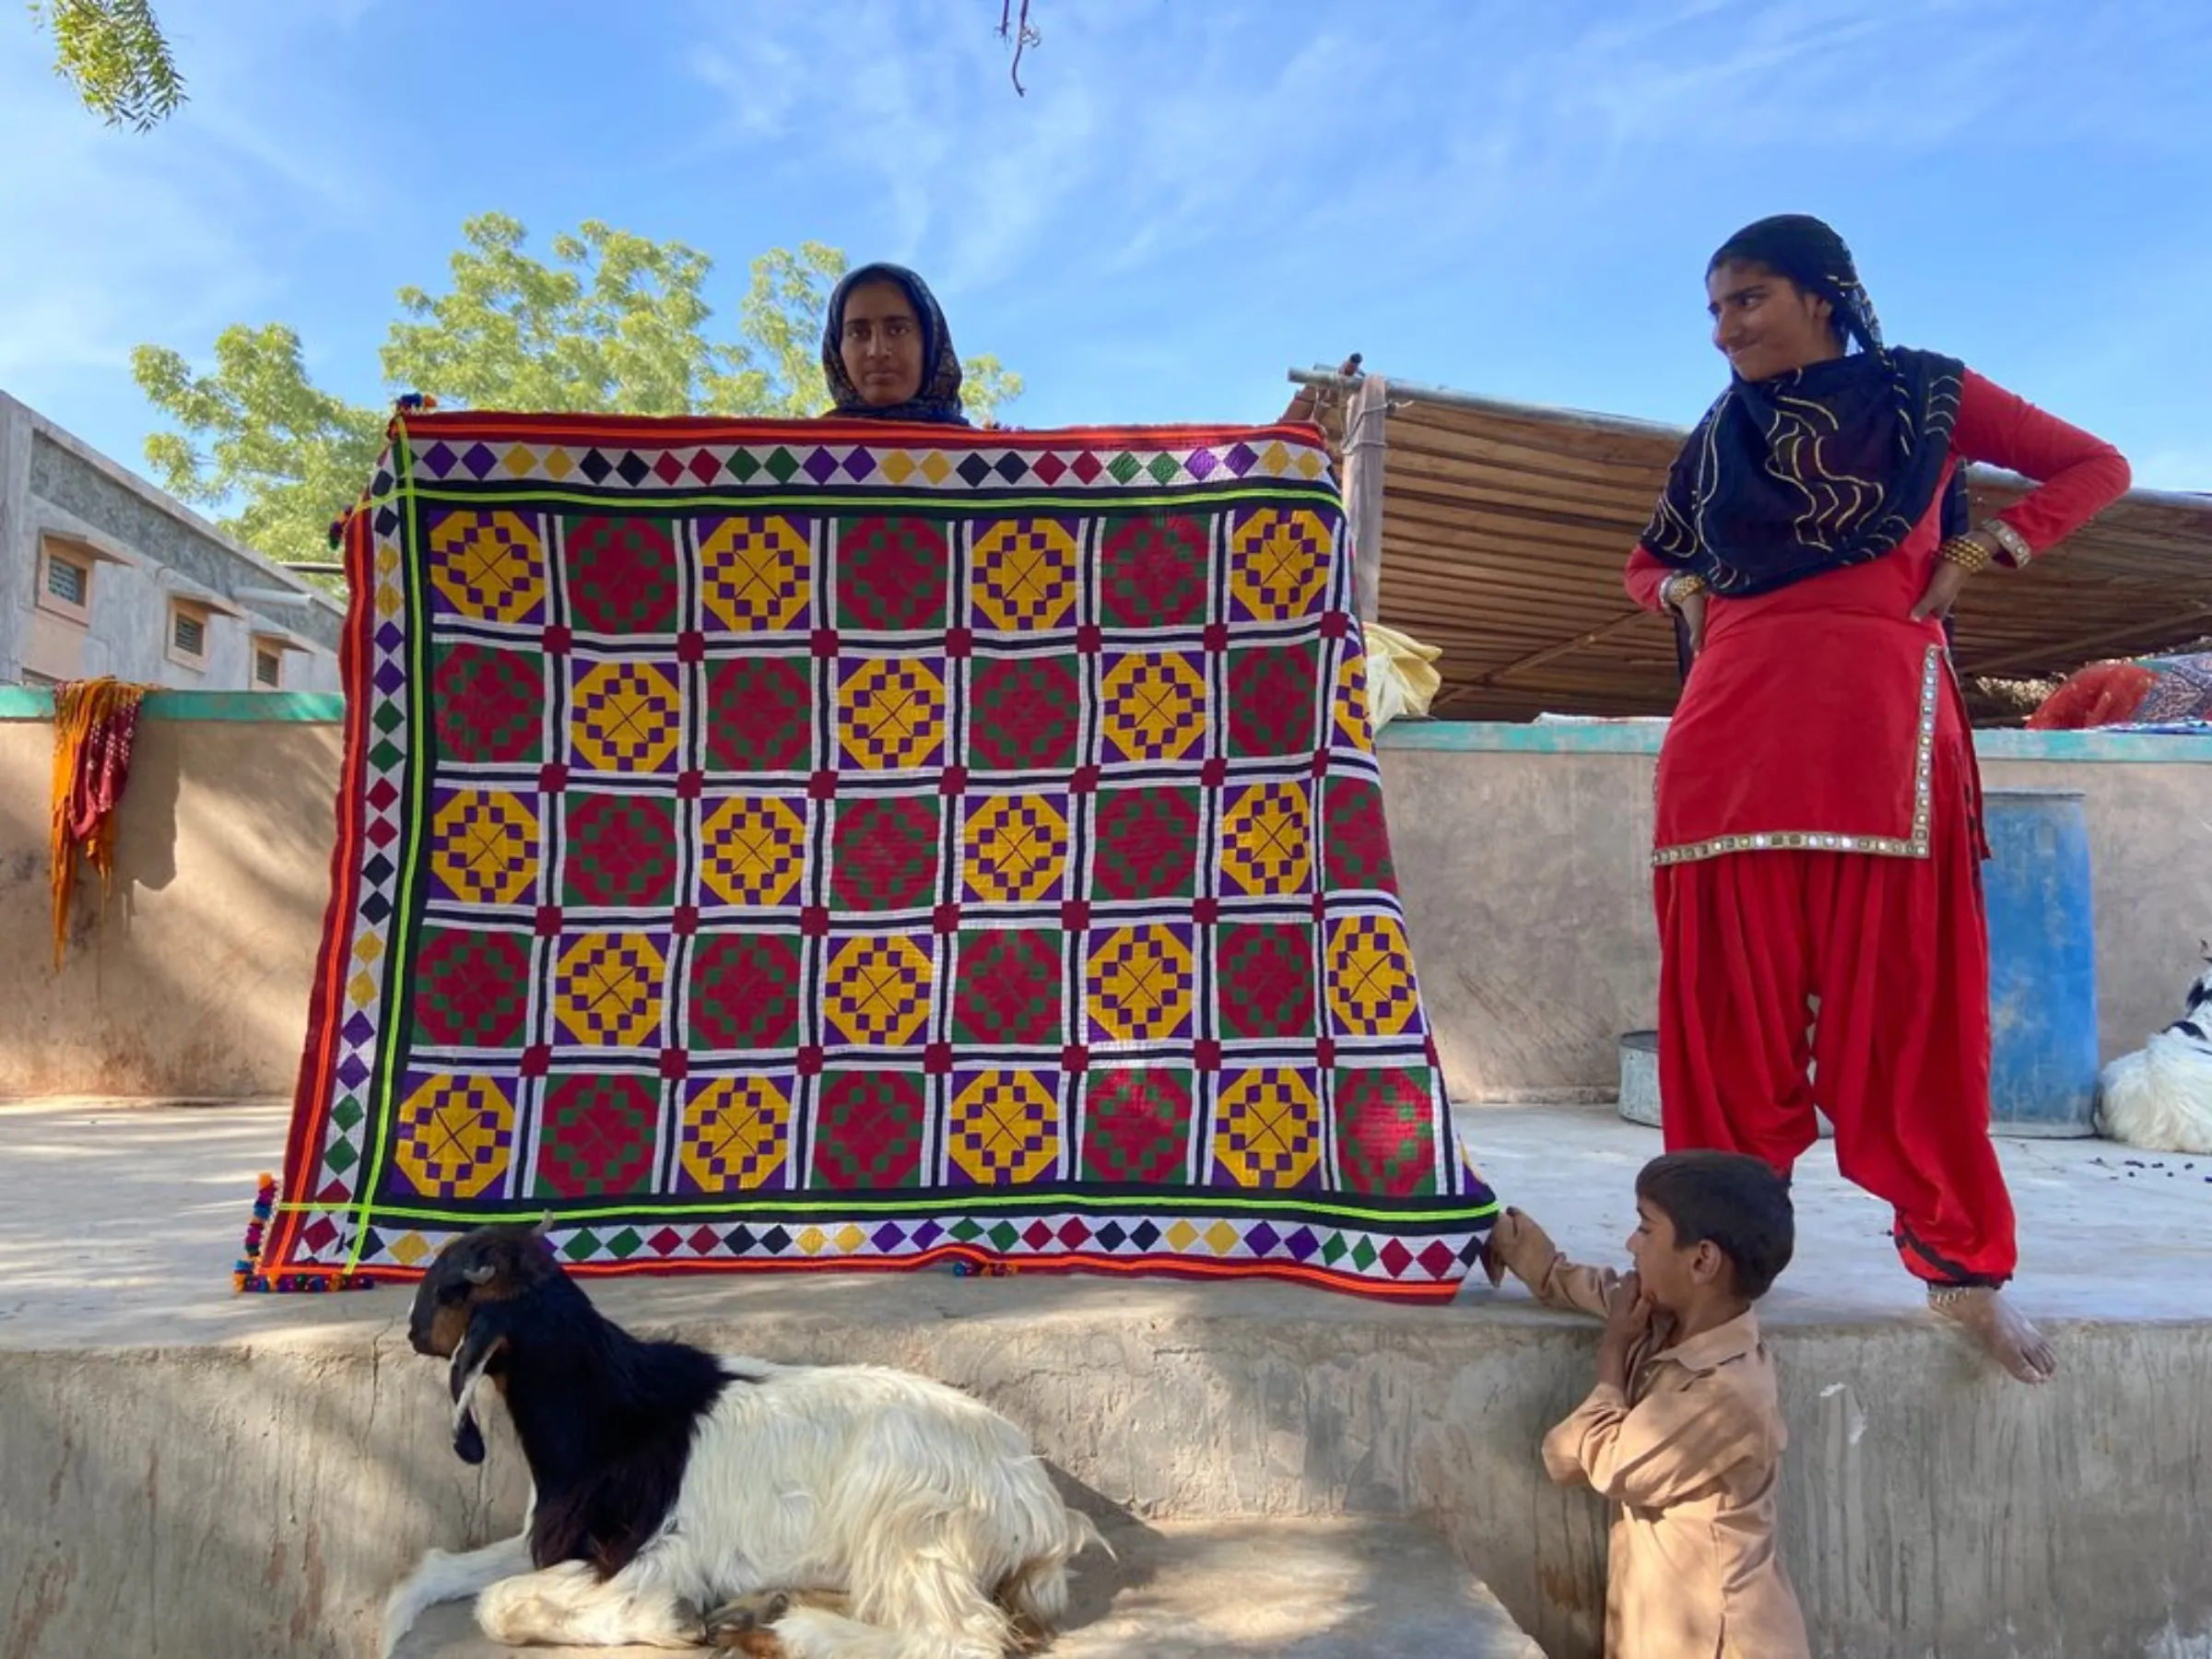 A young girl shows a rug she has stitched for her dowry in Bhadla, India, on December 11, 2021